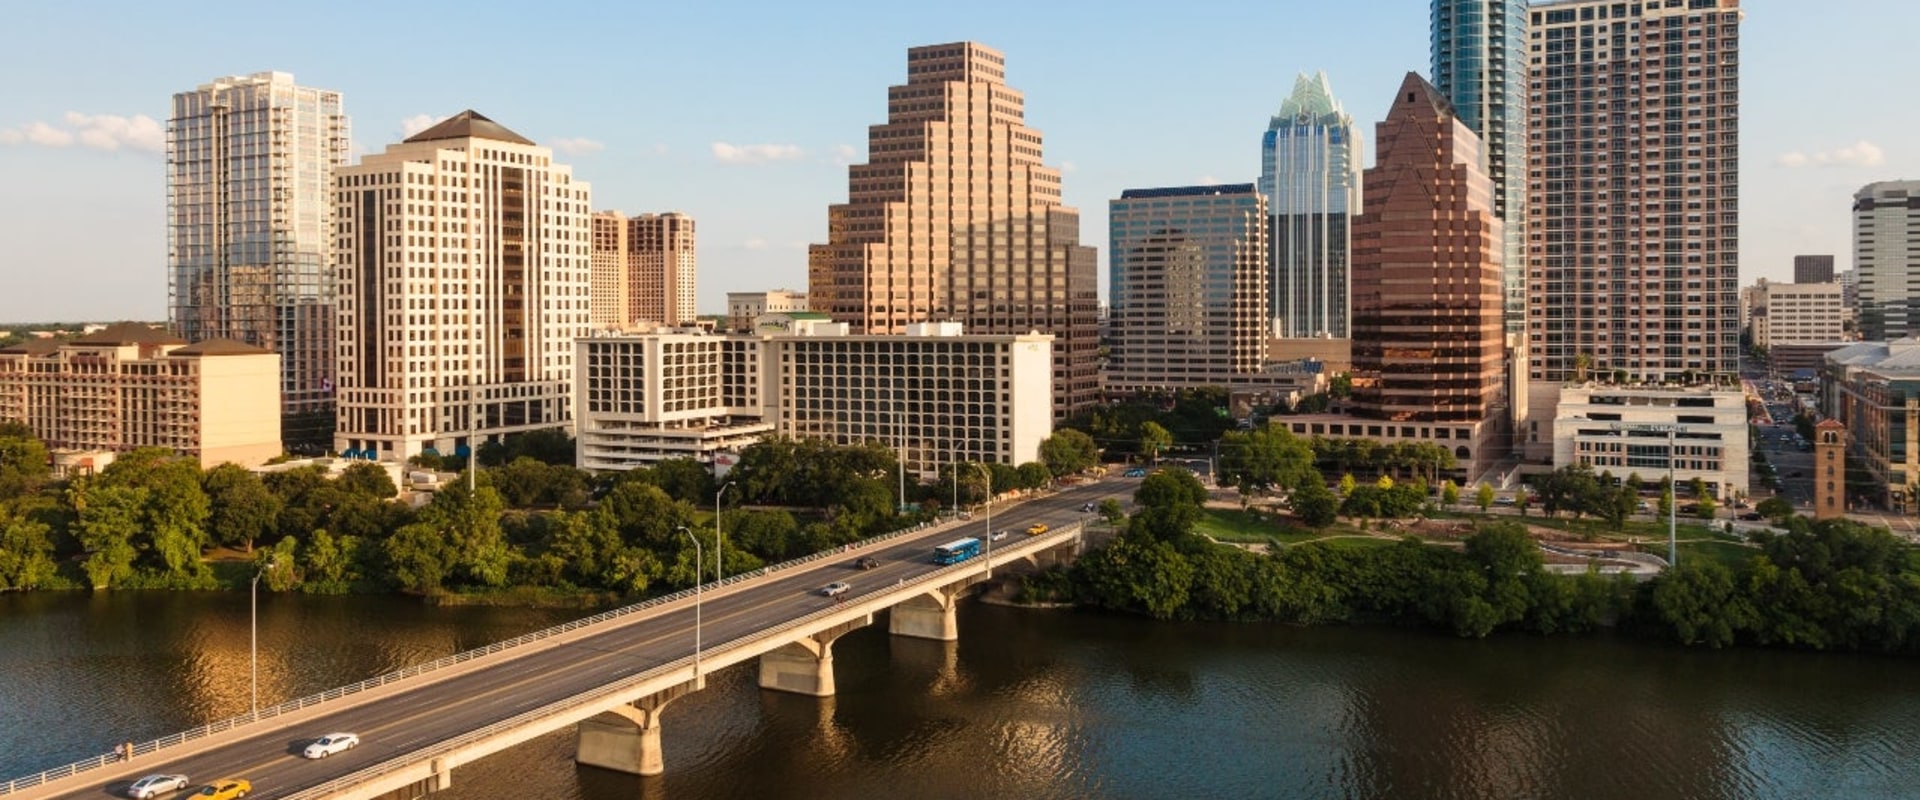 What are the 2 largest cities in texas?